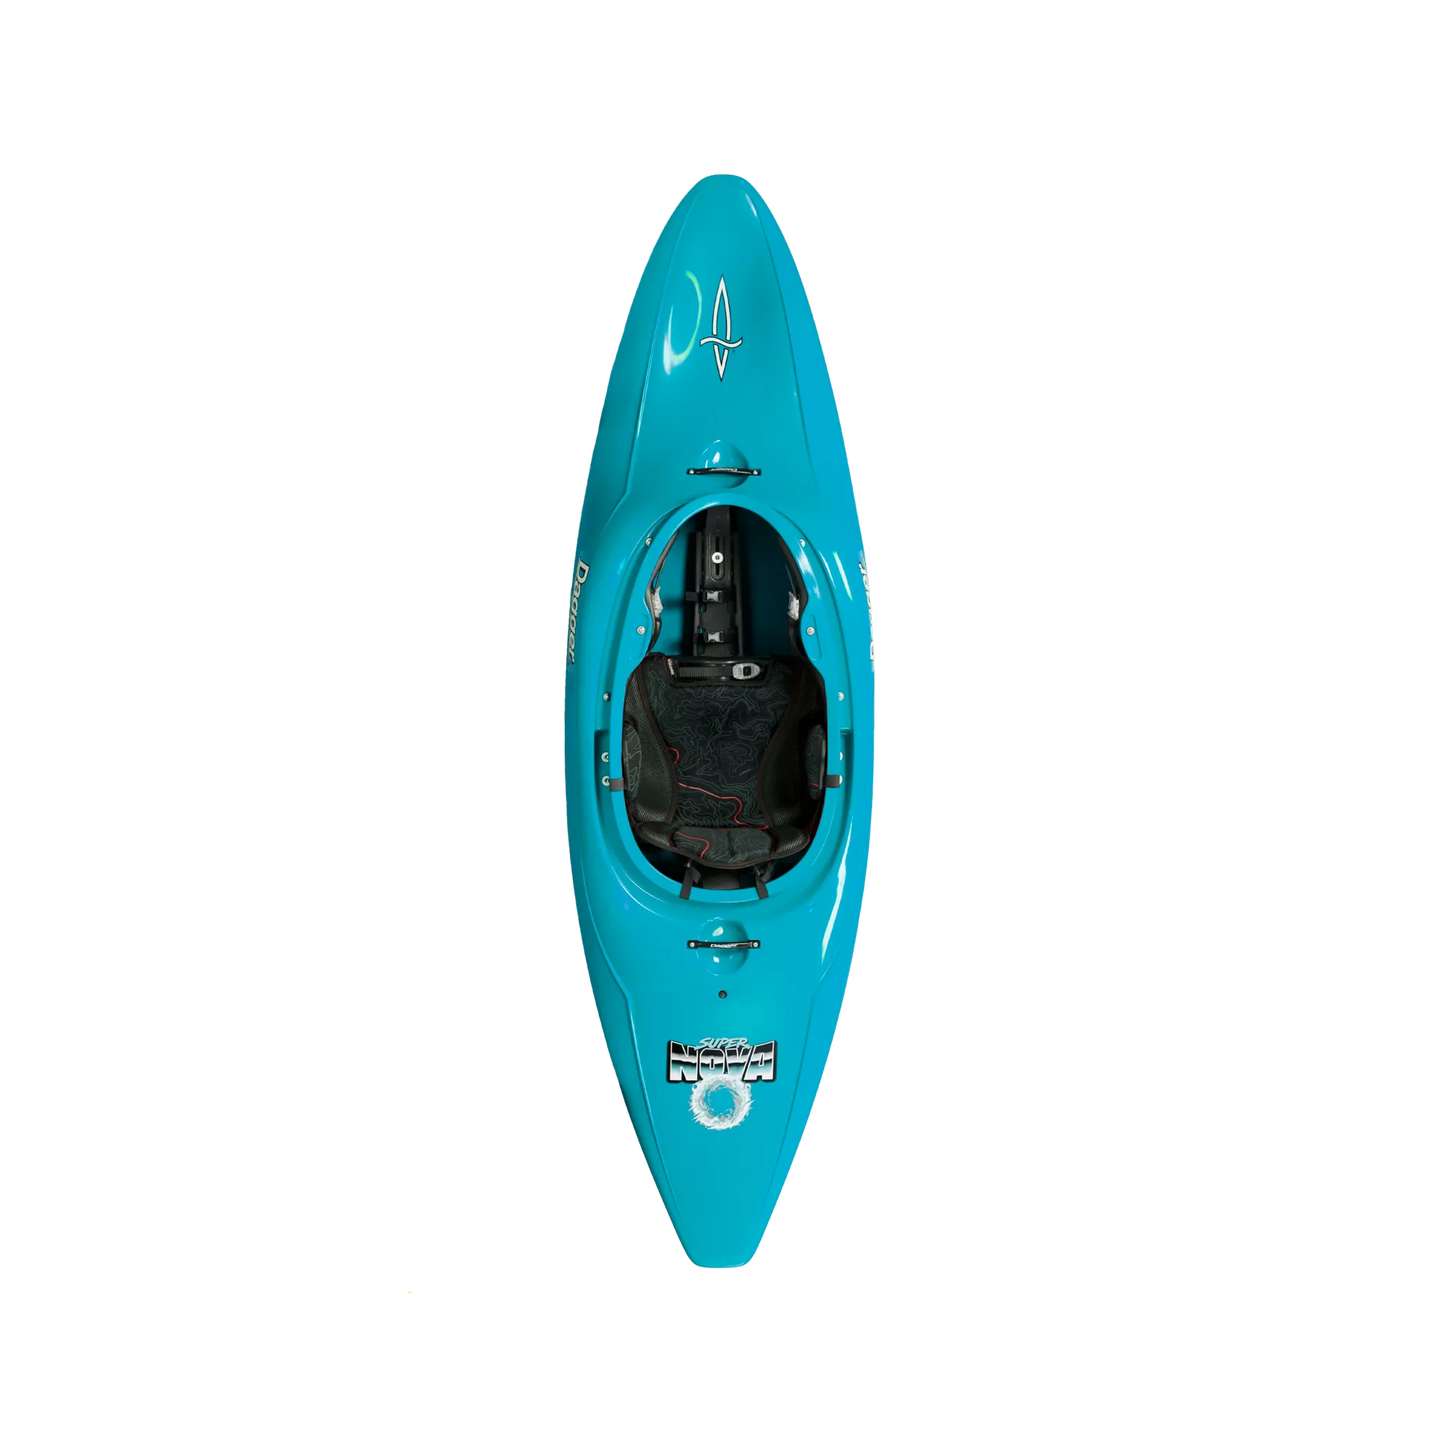 A Dagger Nova / Super Nova whitewater kayak with paddle rests on a black background with white horizontal lines.